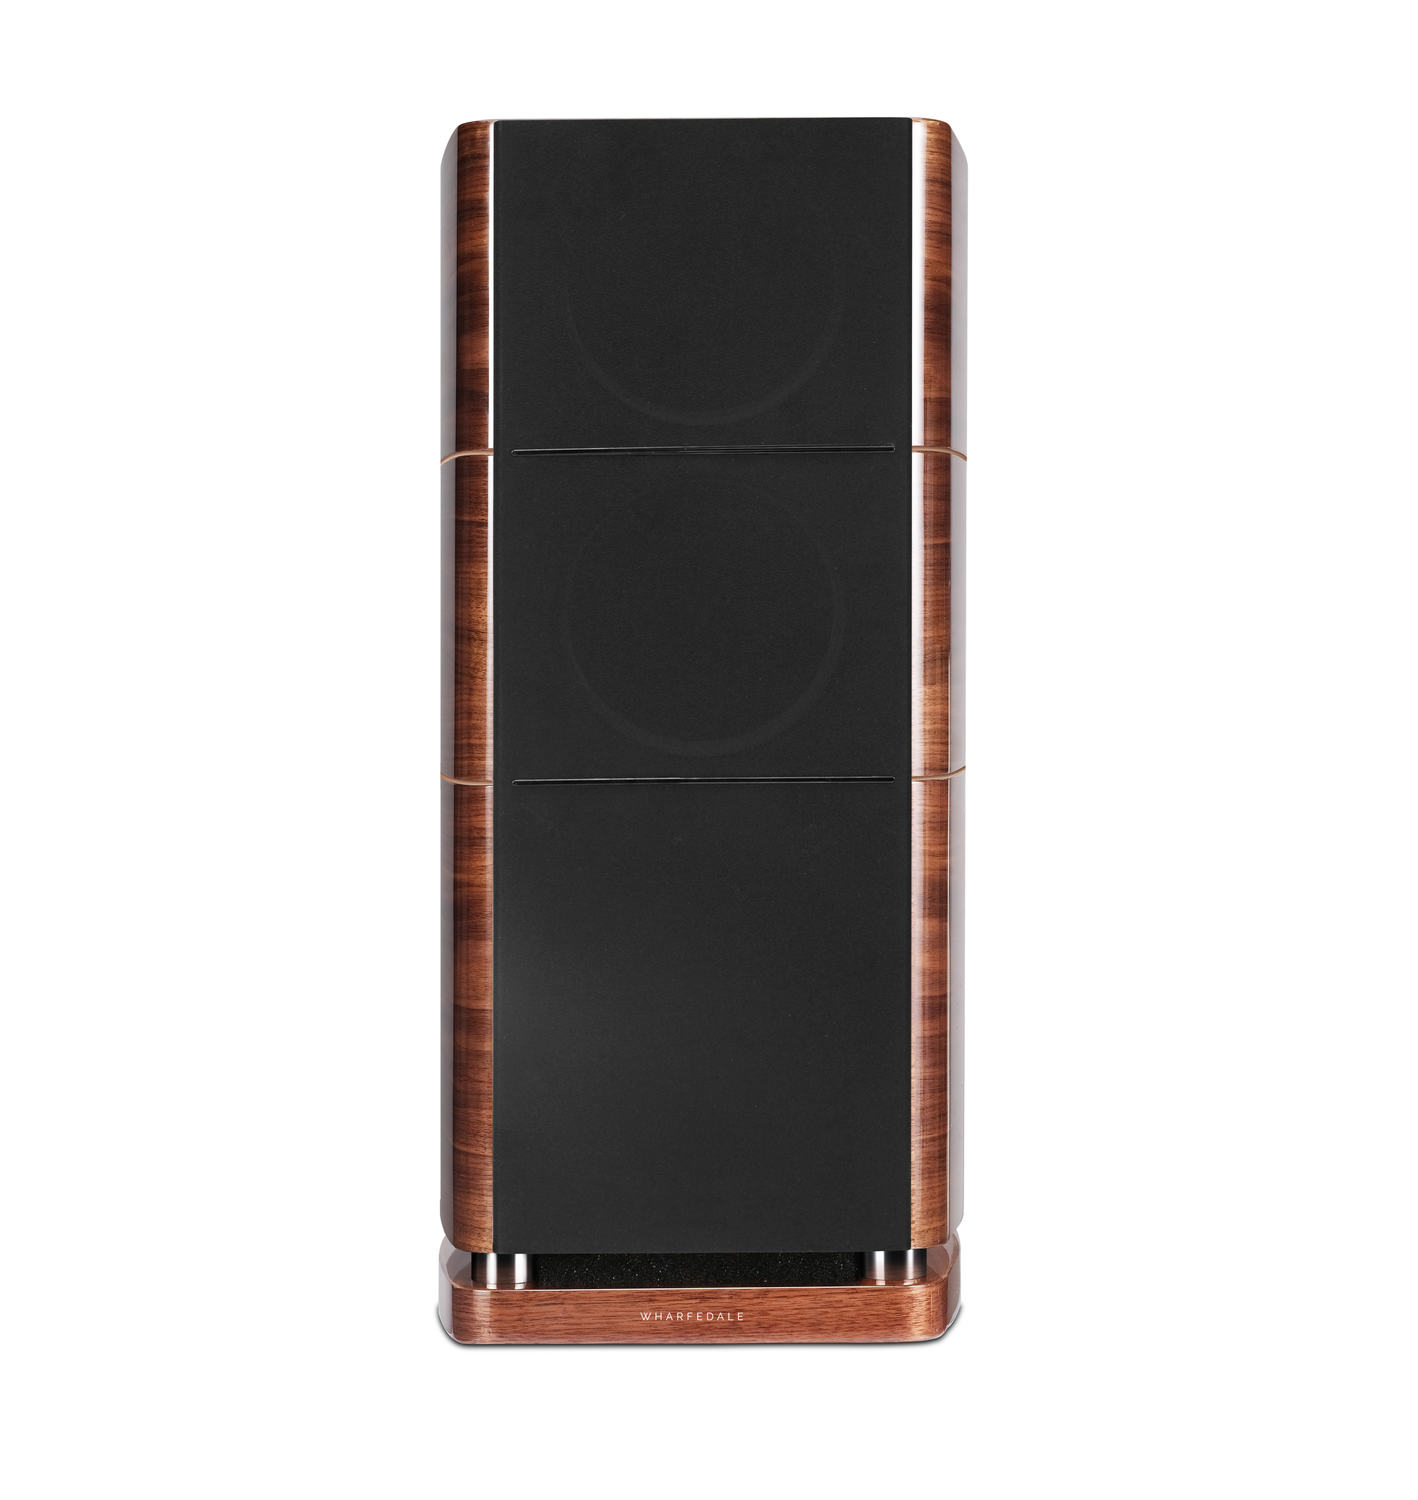 A genuine example of luxury audio, ELYSIAN 2 offers indulgence in design, materials aesthetic and performance. A thorough and no compromise approach has lead the Wharfedale engineers to create a benchmark in affordable, audiophile-grade luxury loudspeakers.